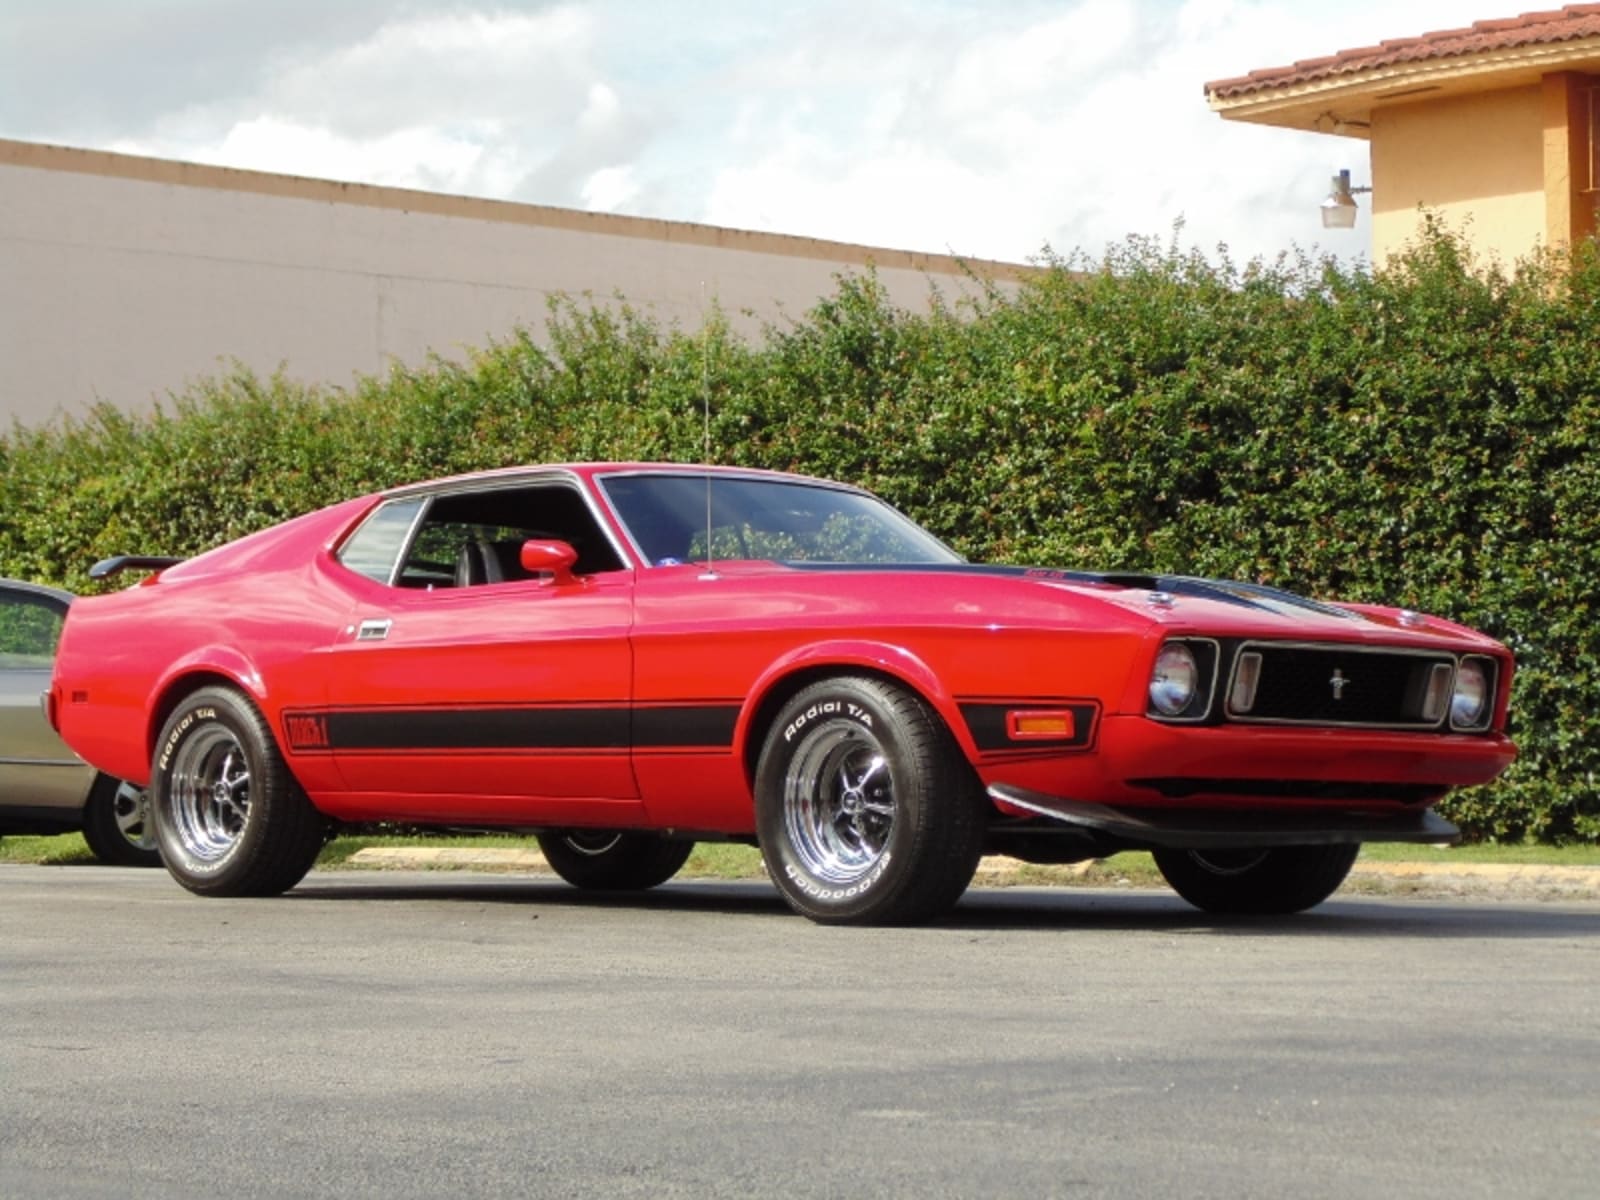 1973 Ford Mustang at Kissimmee 2014 as L94 - Mecum Auctions